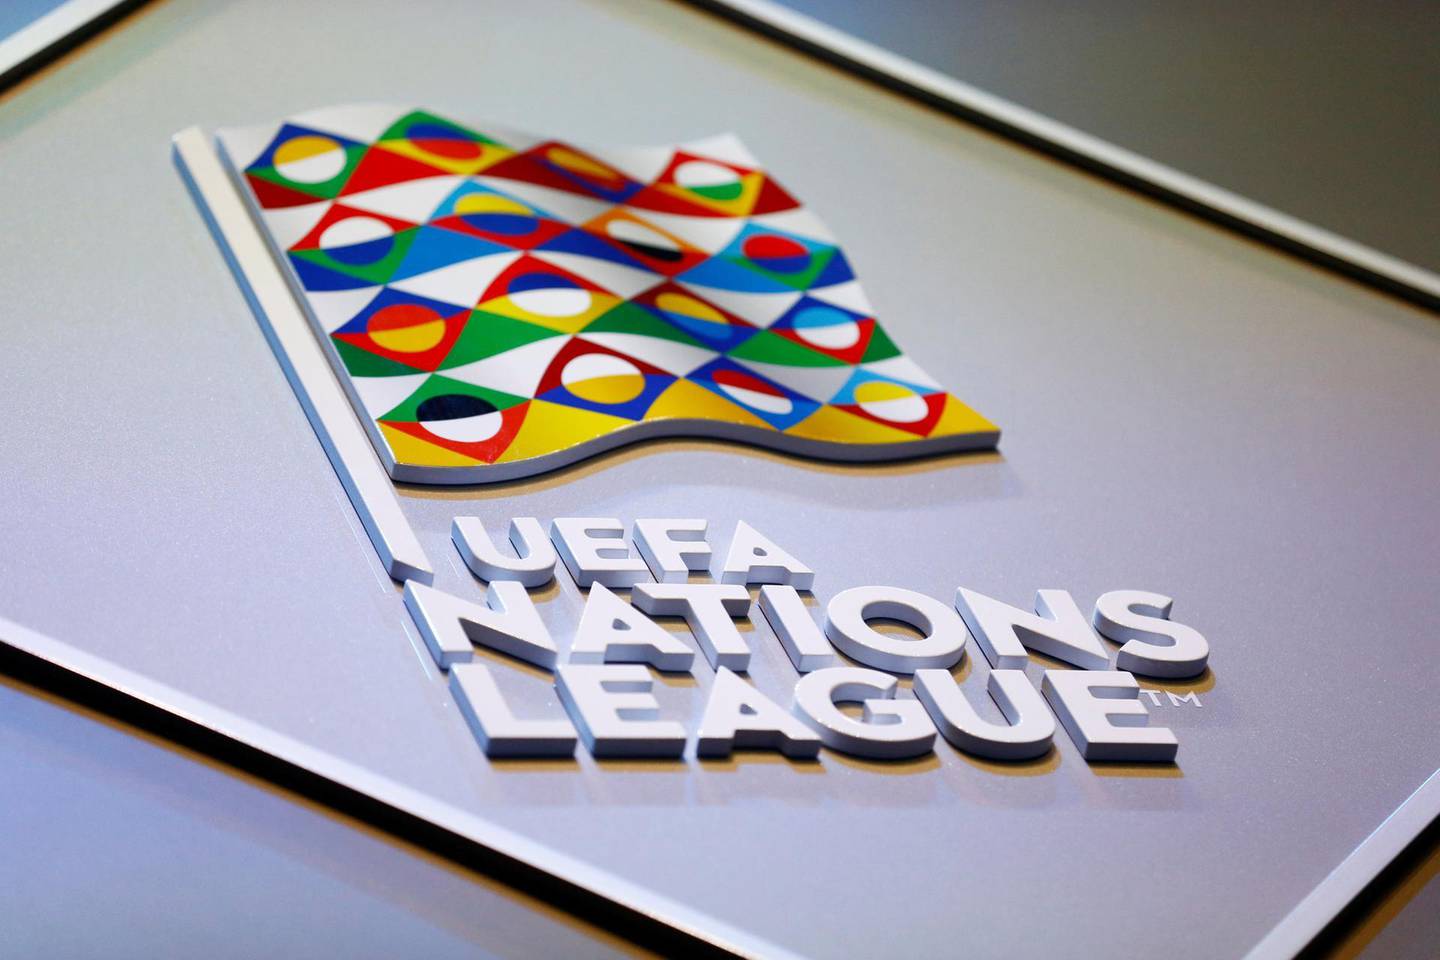 FILE PHOTO: Soccer Football - UEFA Nations League Group Draw - Lausanne, Switzerland - January 24, 2018   General view of the UEFA Nations League logo before the draw   REUTERS/Pierre Albouy/File Photo